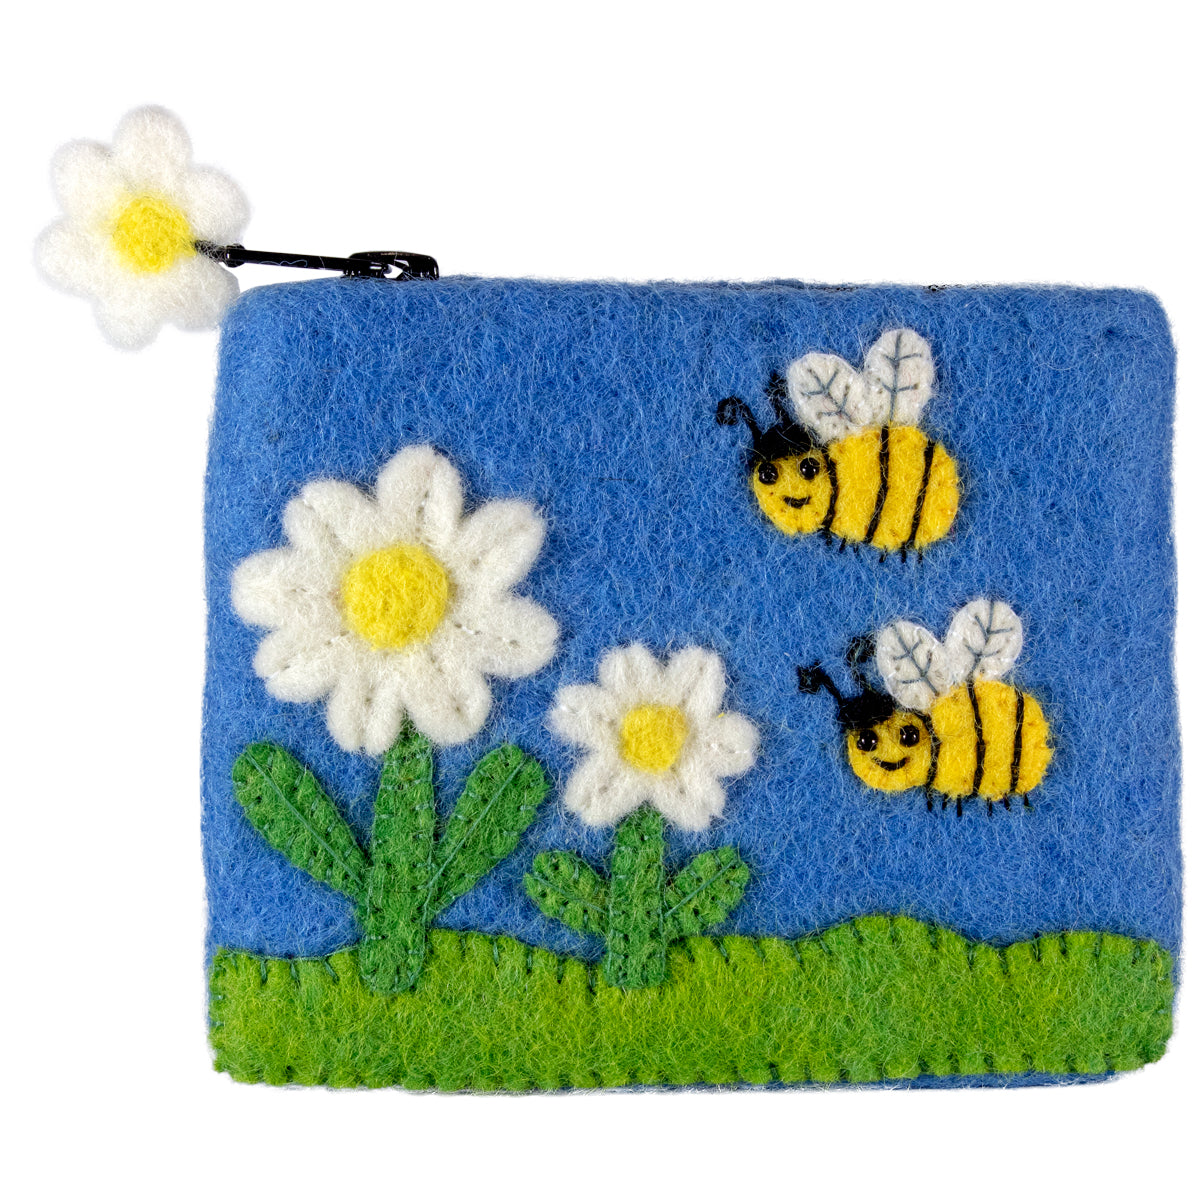 Made a bee coin purse for my shop! Those little cheeks!! : r/crochet